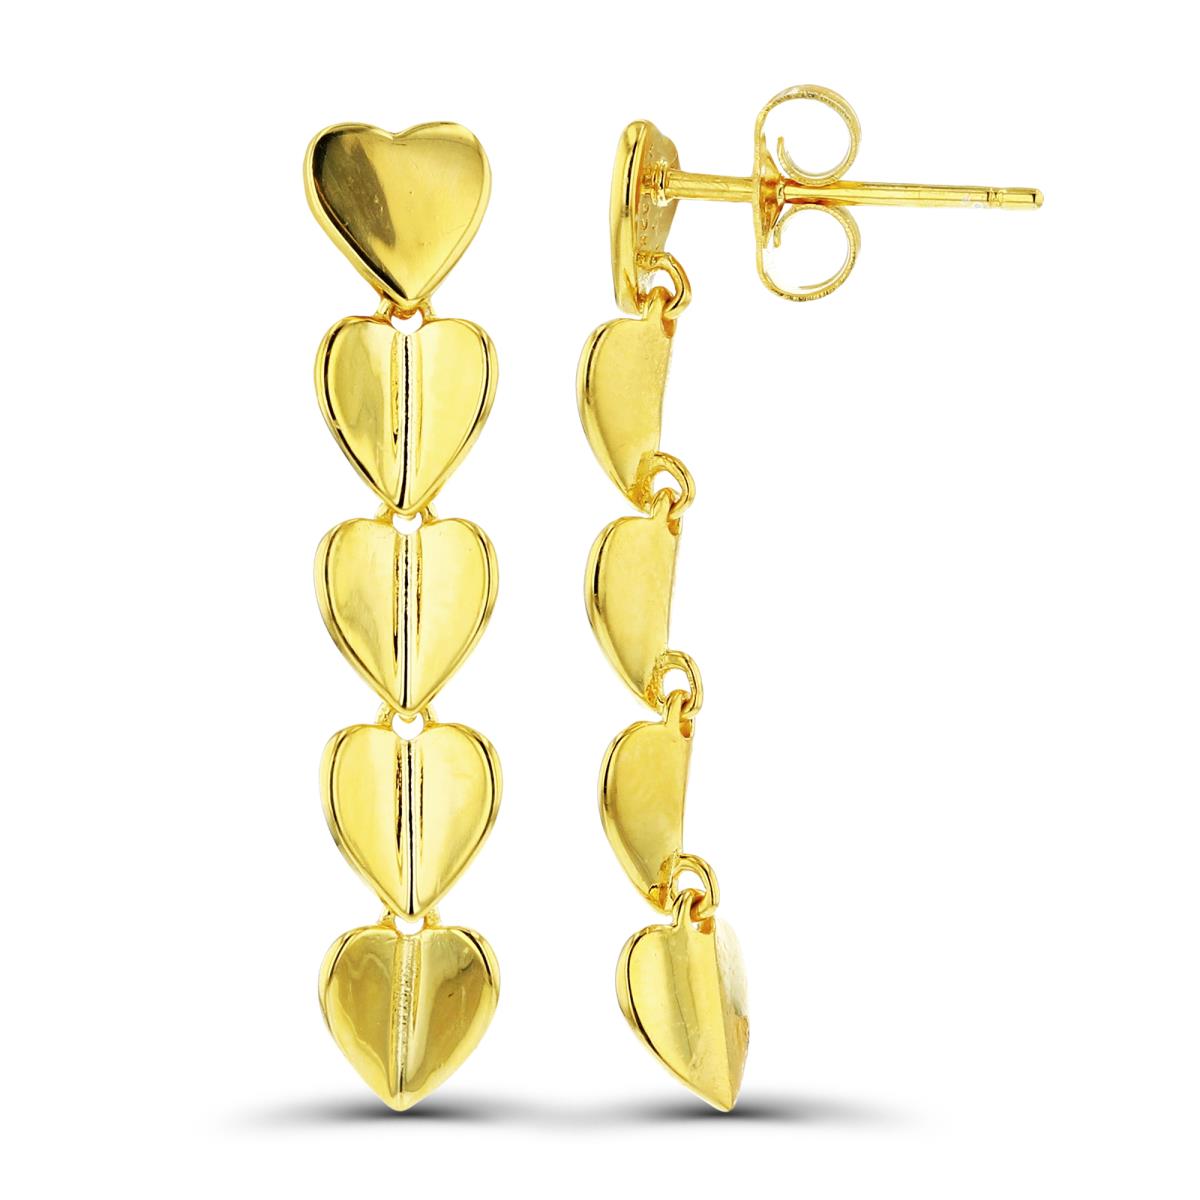 Sterling Silver+1Micron Yellow Gold High Polish DC Vertical Hearts Row Dangling Earrings